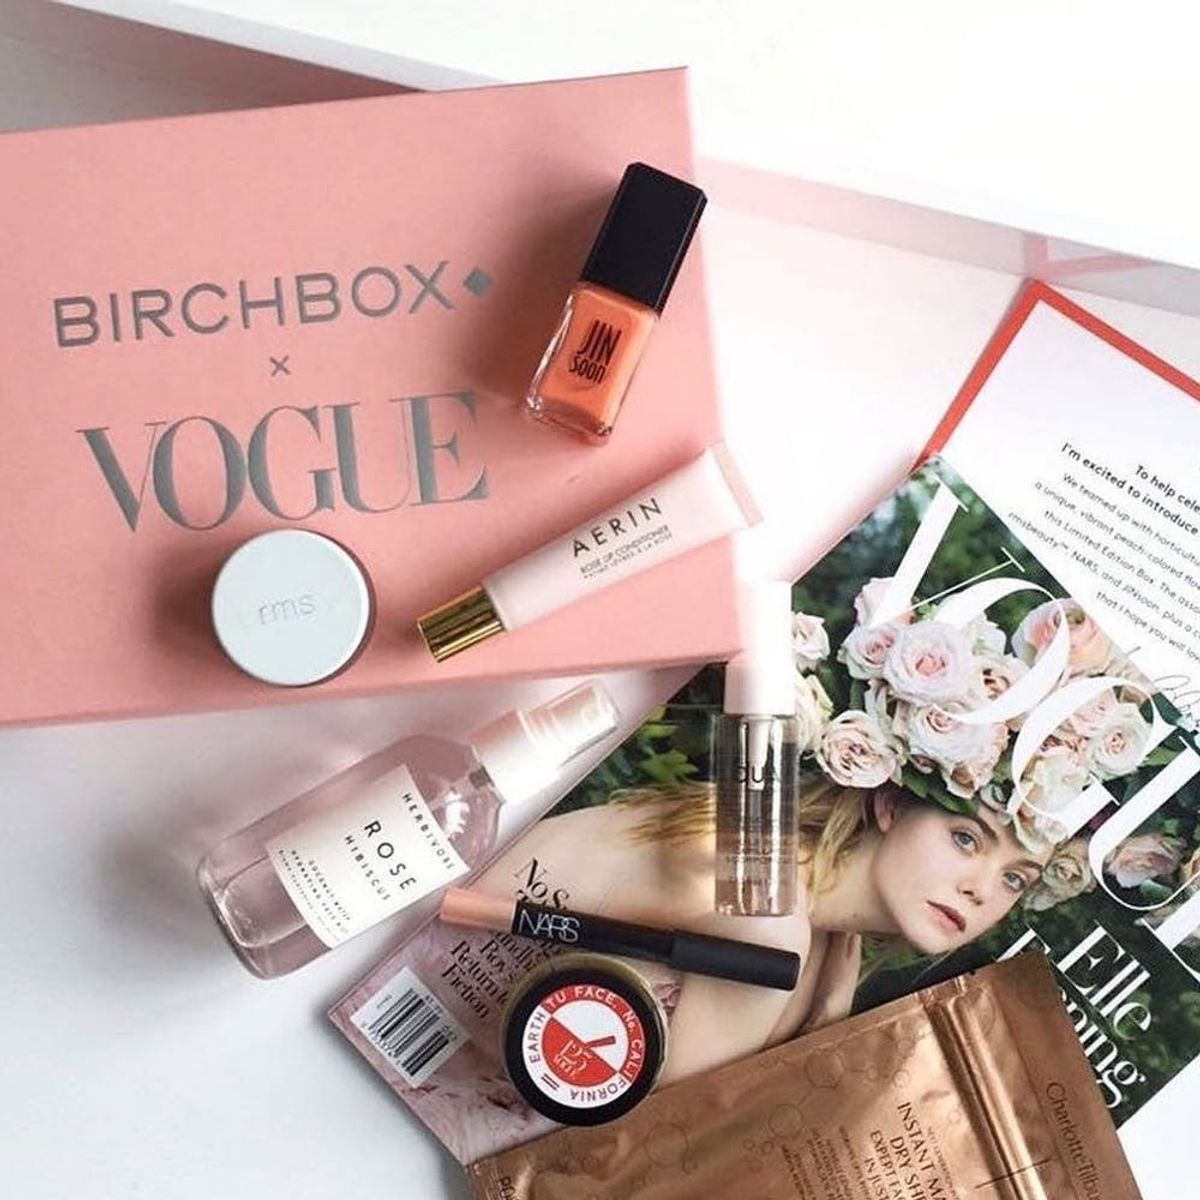 6 End-of-Summer Beauty Boxes to Stock Up on Now